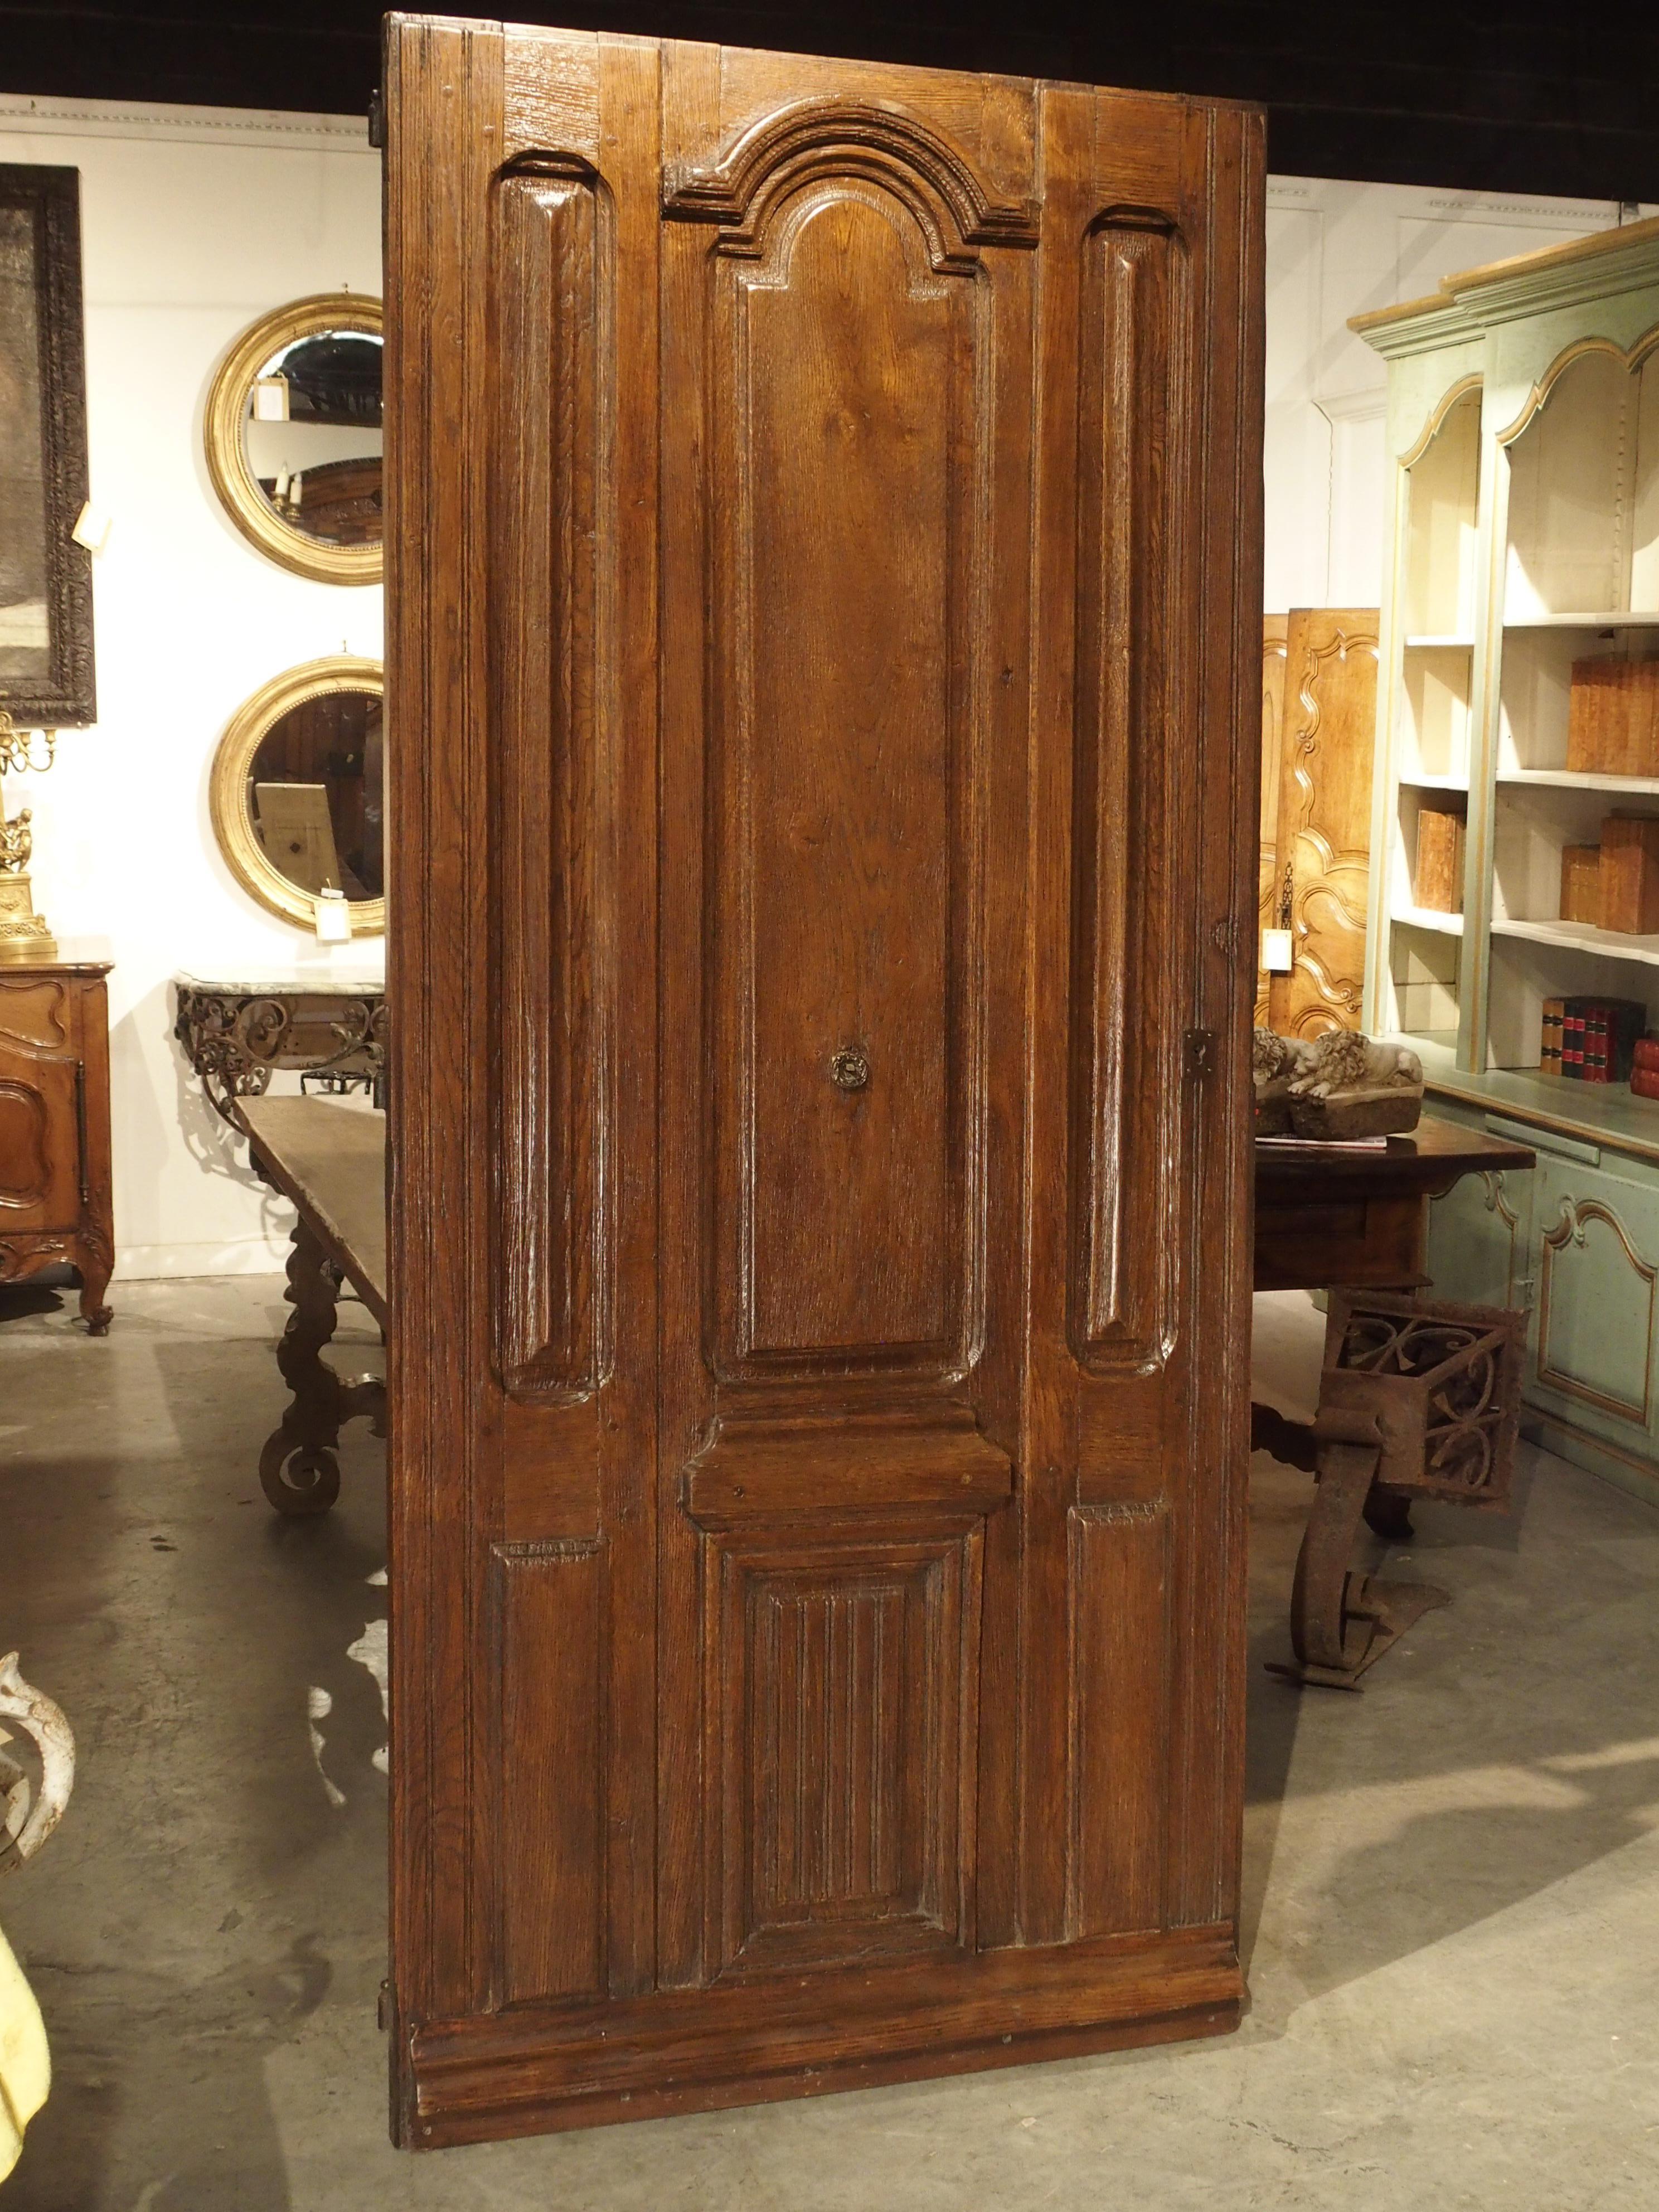 Louis XIV ornamentation was imbued with symmetry, balance and majesty. From France, this remarkable Louis XIV style entry door has elegant inset panels with stepped out moldings on its frontage. The tall vertical moldings visually add to the height